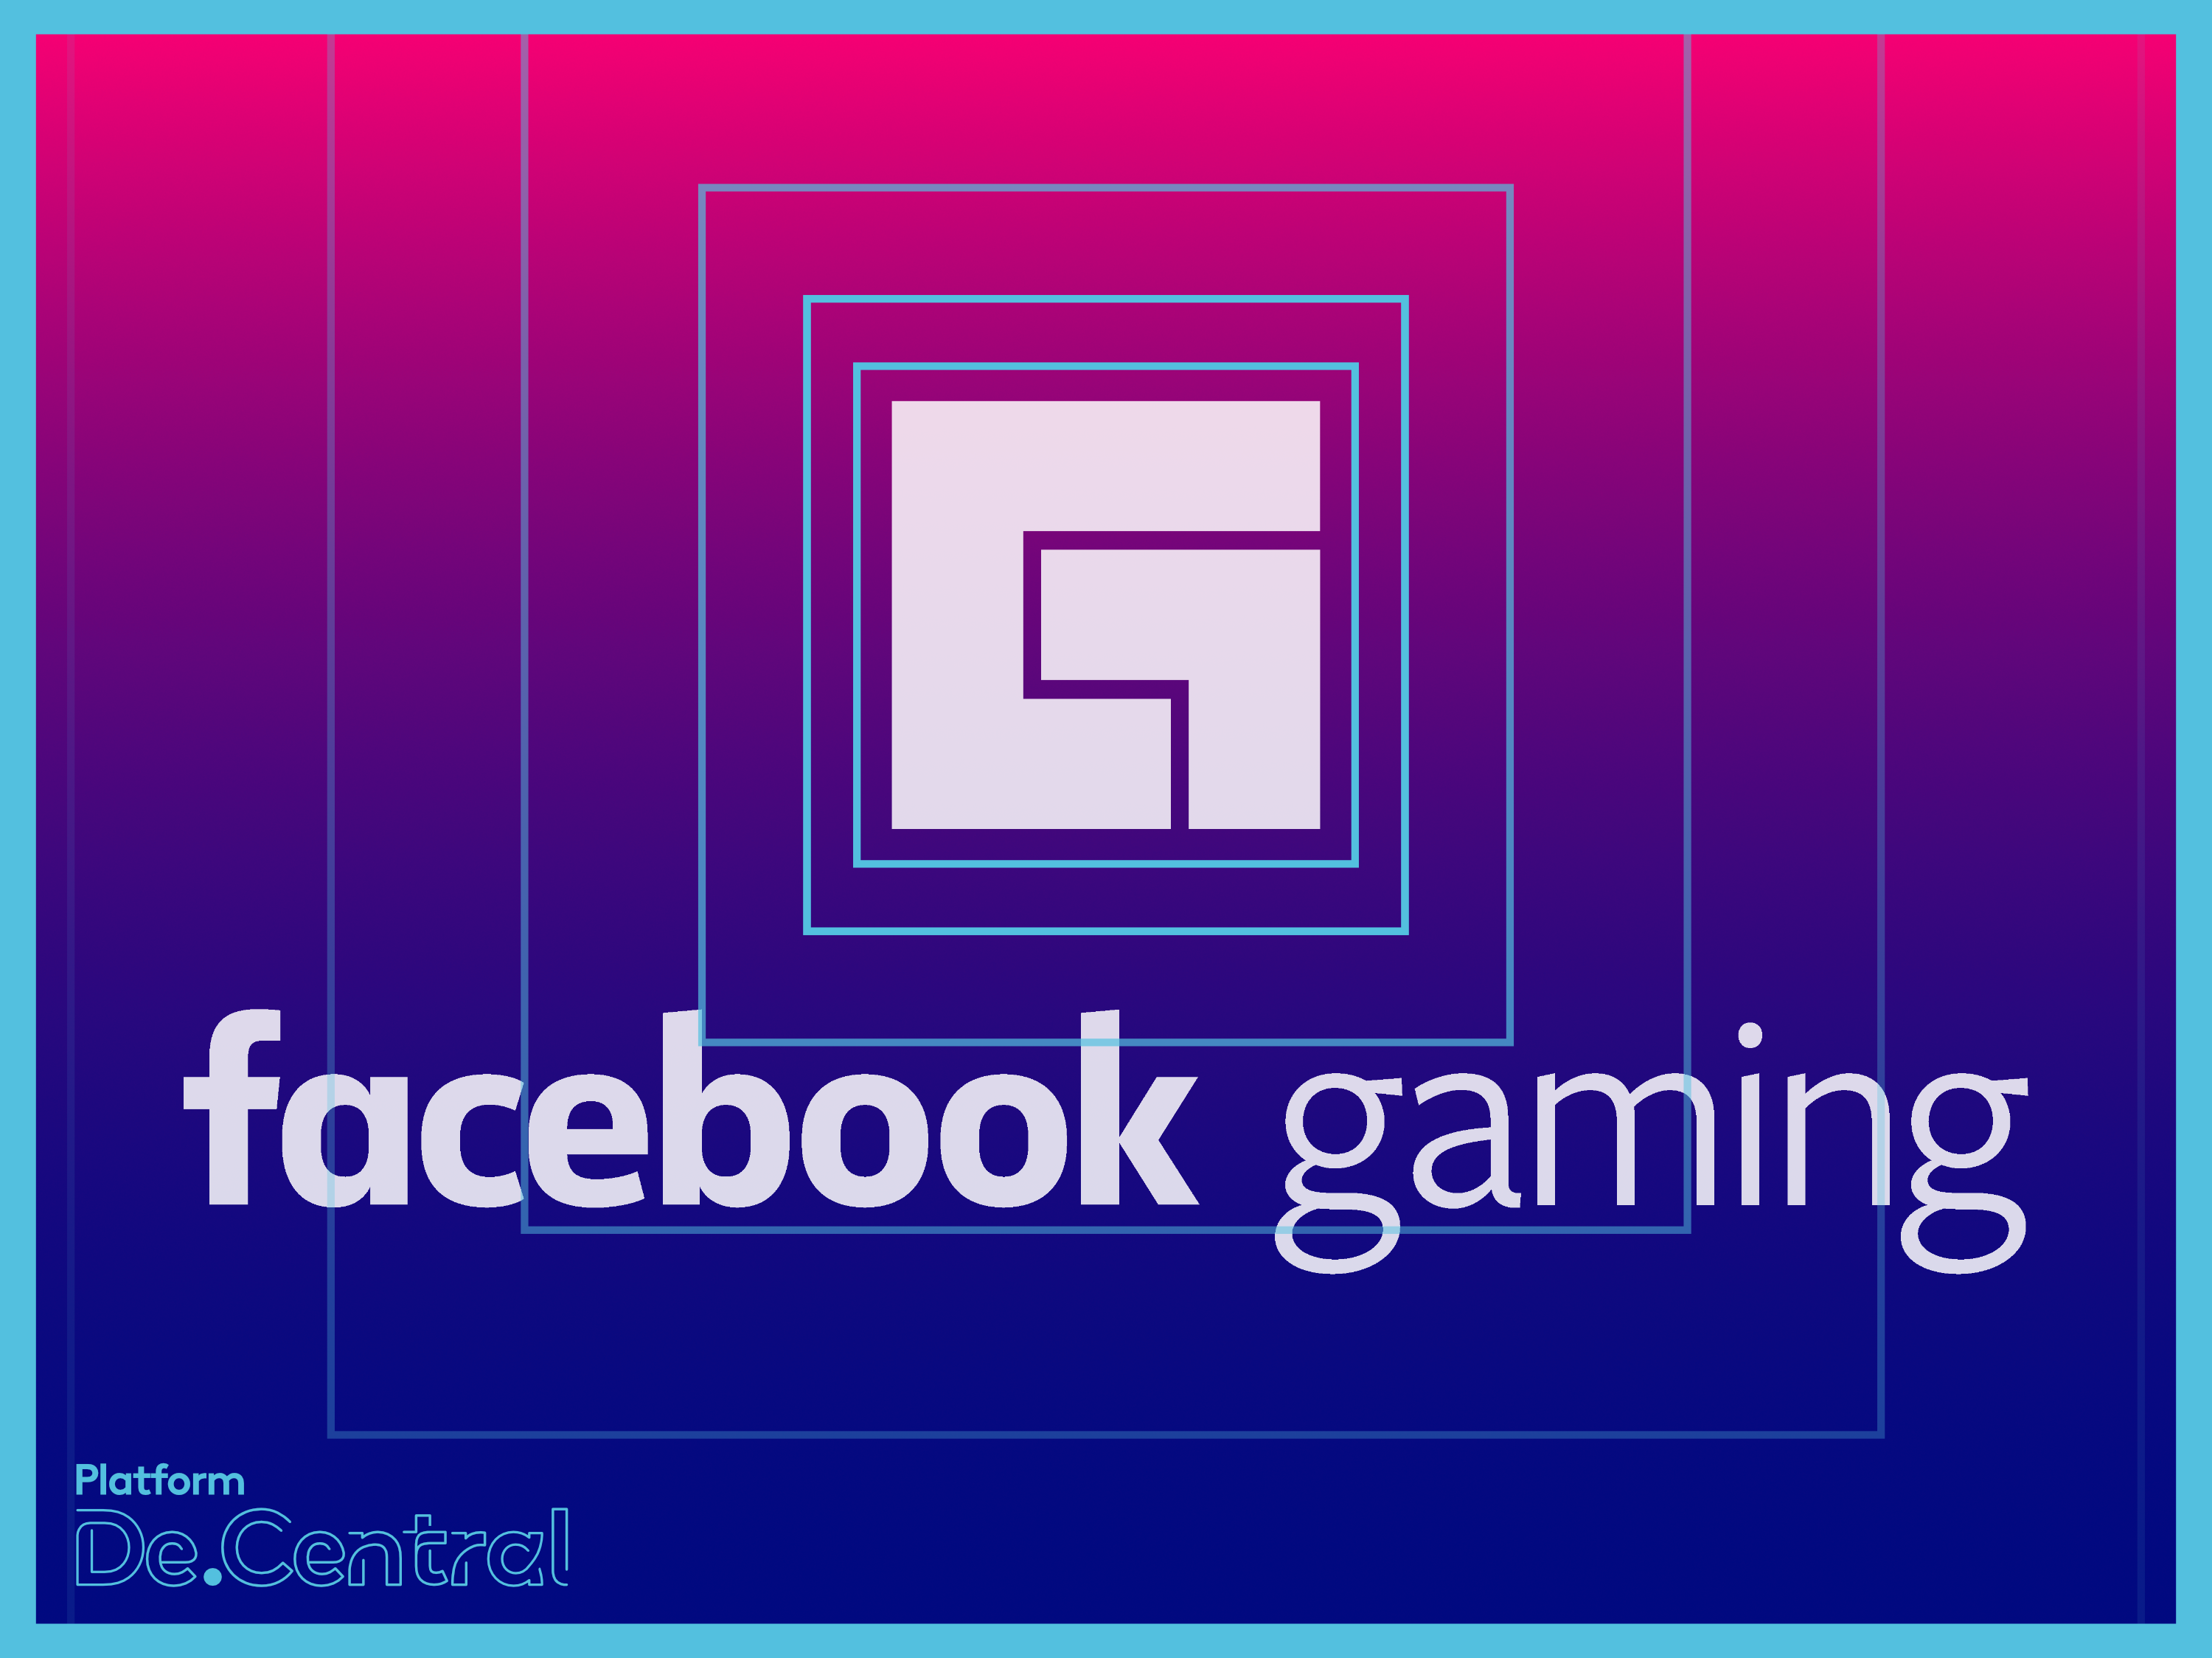 Facebook Gaming to Take on Twitch, Mixer and YouTube